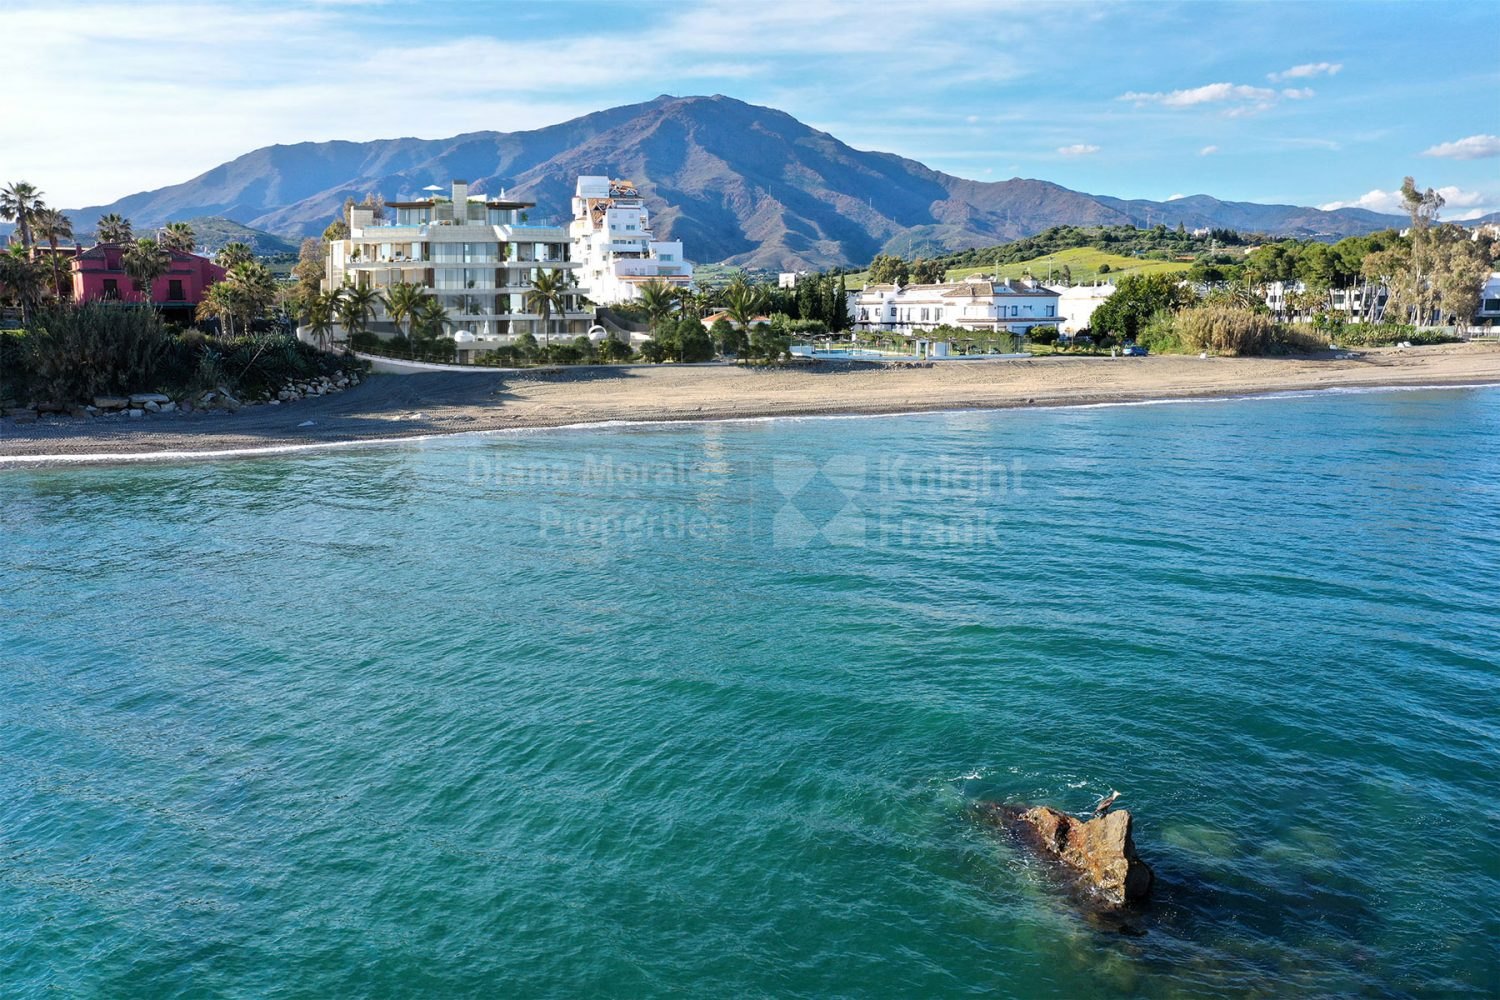 The Sapphire, The dream of living by the sea. Sapphire, Estepona